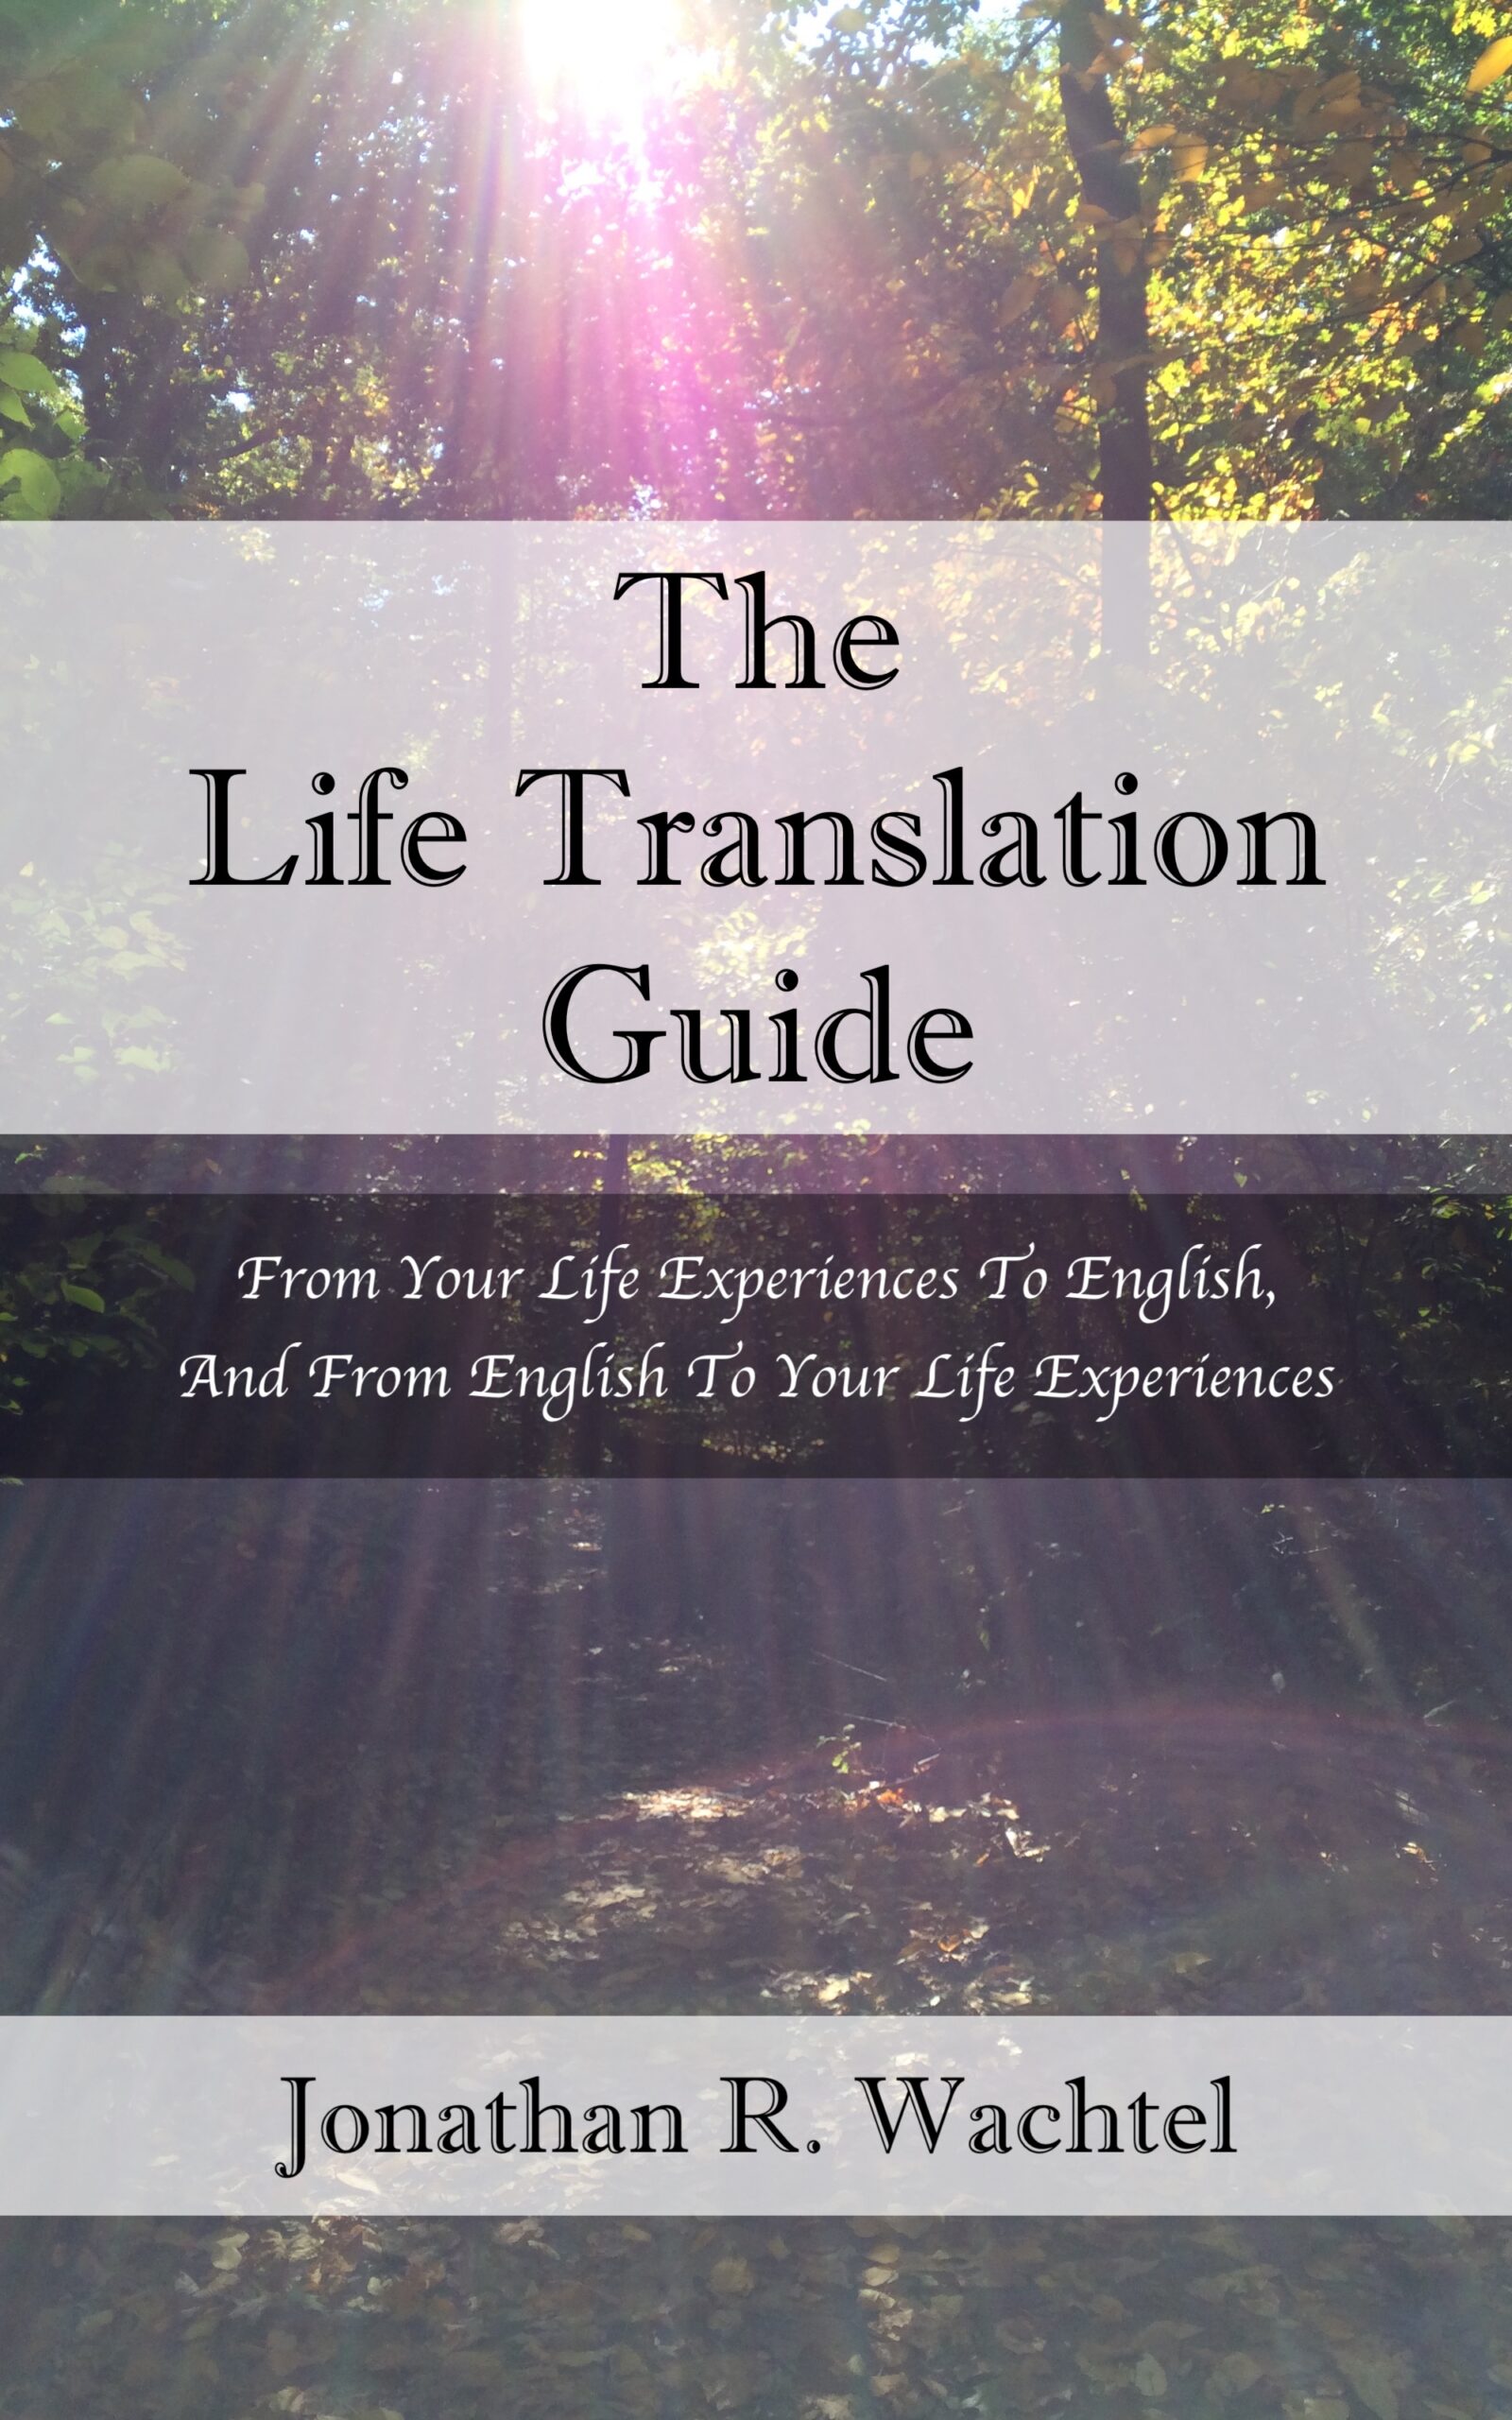 The Life Translation Guide: From Your Life Experiences To English,
And From English To Your Life Experiences, inspirational ebook by South Windsor, CT, Hartford County, Connecticut life coach and life consultant, relationship coach and relationship consultant, career coach and career consultant, business coach and business consultant, marketing coach and marketing consultant, SEO expert and SEO consultant, health coach and health consultant, success coach and success consultant, law of attraction coach and law of attraction consultant, international speaker and best-selling author and Kew Gardens, Queens, New York City, New York, NY life coach and life consultant, relationship coach and relationship consultant, career coach and career consultant, business coach and business consultant, marketing coach and marketing consultant, SEO expert and SEO consultant, health coach and health consultant, success coach and success consultant, law of attraction coach and law of attraction consultant, international speaker and best-selling author Jonathan R. Wachtel in South Windsor, CT, Hartford County, Connecticut, CT, Wapping, CT, Windsor, CT, East Windsor, CT, Windsor Locks, CT, Manchester, CT, Vernon, CT, West Hartford, CT, East Hartford, CT, Hartford, CT, Glastonbury, CT, Farmington, CT, Bloomfield, CT, Ellington, CT, Bolton, CT, Somers, CT, Enfield, CT, Suffield, CT, Tolland, CT, Willington, CT, Stafford, CT, Granby, CT, Addison, CT, Wethersfield, CT, Newington, CT, Simsbury, CT, Avon, CT, East Granby, CT, Canton, CT, Marlborough, CT, Rocky Hill, CT, Cromwell, CT, Andover, CT, Coventry, CT, New Britain, CT, Berlin, CT, Kensington, CT, East Hampton, CT, Portland, CT, Middletown, CT, Middlefield, CT, Hebron, CT, Columbia, CT, Mansfield, CT, Colchester, CT, Lebanon, CT, Windham, CT, Chaplin, CT, Hampton, CT, Ashford, CT, Eastford, CT, Union, CT, Hartland, CT, Barkhamsted, CT, Southington, CT, Bristol, CT, Meriden, CT, Cheshire, CT, Durham, CT, Wallingford, CT, Northford, CT, Hamden, CT, Bozrah, CT, Sprague, CT, Lisbon, CT, Salem, CT, East Haddam, CT, Chester, CT, Lyme, CT, Essex, CT, Montville, CT, Norwich, CT, Preston, CT, Ledyard, CT, New London, CT, Lisbon, CT, Plainfield, CT, Brooklyn, CT, Pomfret, CT, Woodstock, CT, Putnam, CT, Killingly, CT, Sterling, CT, North Stonington, CT, Stonington, CT, East Lyme, CT, Old Lyme, CT, Old Saybrook, CT, Madison, CT, Guilford, CT, North Branford, CT, Branford, CT, New Haven, CT, West Haven, CT, Wolcott, CT, Waterbury, CT, Naugatuck, CT, Middlebury, CT, Woodbury, CT, Watertown, CT, Thomaston, CT, Burlington, CT, Harwinton, CT, Torrington, CT,  New Hartford, CT, Winchester, CT, Colebrook, CT, Norfolk, CT, Goshen, CT, Litchfield, CT, Morris, CT, Bethlehem, CT, Southbury, CT, Cornwall, CT, Warren, CT, Canaan, CT, North Canaan, CT, Salisbury, CT, Sharon, CT, Kent, CT, Roxbury, CT, New Milford, CT, Brookfield, CT, Fairfield, CT, Newtown, CT, Monroe, CT, Shelton, CT, Milford, CT, Trumbull, CT, Bridgeport, CT, Bethel, CT, Redding, CT, Danbury, CT, New Fairfield, CT, Ridgefield, CT, Wilton, CT, Westport, CT, Norwalk, CT, New Canaan, CT, Darien, CT, Stamford, CT, Greenwich, CT, Agawam, MA, East Longmeadow, MA, Springfield, MA, Southwick, MA, Granville, MA, Tolland, MA, Westfield, MA, Chicopee, MA, Wilbraham, MA, Ludlow, MA, Monson, MA, Wales, MA, Holland, MA, Brimfield, MA, Palmer, MA, Ludlow, MA, Holyoke, MA, Russell, MA, Blandford, MA, formerly in Kew Gardens, Queens, New York City, New York, NY, near the Upper East Side of Manhattan, near Chelsea, NY, near Westchester, NY, near the Hamptons, on Long Island, NY, serving South Windsor, CT, Hartford County, Connecticut, CT, Wapping, CT, Windsor, CT, East Windsor, CT, Windsor Locks, CT, Manchester, CT, Vernon, CT, West Hartford, CT, East Hartford, CT, Hartford, CT, Glastonbury, CT, Farmington, CT, Bloomfield, CT, Ellington, CT, Bolton, CT, Somers, CT, Enfield, CT, Suffield, CT, Tolland, CT, Willington, CT, Stafford, CT, Granby, CT, Addison, CT, Wethersfield, CT, Newington, CT, Simsbury, CT, Avon, CT, East Granby, CT, Canton, CT, Marlborough, CT, Rocky Hill, CT, Cromwell, CT, Andover, CT, Coventry, CT, New Britain, CT, Berlin, CT, Kensington, CT, East Hampton, CT, Portland, CT, Middletown, CT, Middlefield, CT, Hebron, CT, Columbia, CT, Mansfield, CT, Colchester, CT, Lebanon, CT, Windham, CT, Chaplin, CT, Hampton, CT, Ashford, CT, Eastford, CT, Union, CT, Hartland, CT, Barkhamsted, CT, Southington, CT, Bristol, CT, Meriden, CT, Cheshire, CT, Durham, CT, Wallingford, CT, Northford, CT, Hamden, CT, Bozrah, CT, Sprague, CT, Lisbon, CT, Salem, CT, East Haddam, CT, Chester, CT, Lyme, CT, Essex, CT, Montville, CT, Norwich, CT, Preston, CT, Ledyard, CT, New London, CT, Lisbon, CT, Plainfield, CT, Brooklyn, CT, Pomfret, CT, Woodstock, CT, Putnam, CT, Killingly, CT, Sterling, CT, North Stonington, CT, Stonington, CT, East Lyme, CT, Old Lyme, CT, Old Saybrook, CT, Madison, CT, Guilford, CT, North Branford, CT, Branford, CT, New Haven, CT, West Haven, CT, Wolcott, CT, Waterbury, CT, Naugatuck, CT, Middlebury, CT, Woodbury, CT, Watertown, CT, Thomaston, CT, Burlington, CT, Harwinton, CT, Torrington, CT,  New Hartford, CT, Winchester, CT, Colebrook, CT, Norfolk, CT, Goshen, CT, Litchfield, CT, Morris, CT, Bethlehem, CT, Southbury, CT, Cornwall, CT, Warren, CT, Canaan, CT, North Canaan, CT, Salisbury, CT, Sharon, CT, Kent, CT, Roxbury, CT, New Milford, CT, Brookfield, CT, Fairfield, CT, Newtown, CT, Monroe, CT, Shelton, CT, Milford, CT, Trumbull, CT, Bridgeport, CT, Bethel, CT, Redding, CT, Danbury, CT, New Fairfield, CT, Ridgefield, CT, Wilton, CT, Westport, CT, Norwalk, CT, New Canaan, CT, Darien, CT, Stamford, CT, Greenwich, CT, Agawam, MA, East Longmeadow, MA, Springfield, MA, Southwick, MA, Granville, MA, Tolland, MA, Westfield, MA, Chicopee, MA, Wilbraham, MA, Ludlow, MA, Monson, MA, Wales, MA, Holland, MA, Brimfield, MA, Palmer, MA, Ludlow, MA, Holyoke, MA, Russell, MA, Blandford, MA, and also Kew Gardens, NY, Forest Hills, NY, Forest Hills Gardens, NY, Kew Garden Hills, NY, all of Queens, NY, Brooklyn, NY, Manhattan, NY, Nassau County, Long Island, NY, Suffolk County, Long Island, NY, Staten Island, the Bronx, all of New York State, Connecticut, Massachusetts, and surrounding areas, and everywhere over the phone and online, who offers life coaching and life consulting, relationship coaching and relationship consulting, career coaching and career consulting, business coaching and business consulting, marketing coaching and marketing consulting, SEO expertise and SEO consulting, health coaching and health consulting, success coaching and success consulting, law of attraction coaching and law of attraction consulting, and more in South Windsor, CT, Hartford County, Connecticut, CT, Wapping, CT, Windsor, CT, East Windsor, CT, Windsor Locks, CT, Manchester, CT, Vernon, CT, West Hartford, CT, East Hartford, CT, Hartford, CT, Glastonbury, CT, Farmington, CT, Bloomfield, CT, Ellington, CT, Bolton, CT, Somers, CT, Enfield, CT, Suffield, CT, Tolland, CT, Willington, CT, Stafford, CT, Granby, CT, Addison, CT, Wethersfield, CT, Newington, CT, Simsbury, CT, Avon, CT, East Granby, CT, Canton, CT, Marlborough, CT, Rocky Hill, CT, Cromwell, CT, Andover, CT, Coventry, CT, New Britain, CT, Berlin, CT, Kensington, CT, East Hampton, CT, Portland, CT, Middletown, CT, Middlefield, CT, Hebron, CT, Columbia, CT, Mansfield, CT, Colchester, CT, Lebanon, CT, Windham, CT, Chaplin, CT, Hampton, CT, Ashford, CT, Eastford, CT, Union, CT, Hartland, CT, Barkhamsted, CT, Southington, CT, Bristol, CT, Meriden, CT, Cheshire, CT, Durham, CT, Wallingford, CT, Northford, CT, Hamden, CT, Bozrah, CT, Sprague, CT, Lisbon, CT, Salem, CT, East Haddam, CT, Chester, CT, Lyme, CT, Essex, CT, Montville, CT, Norwich, CT, Preston, CT, Ledyard, CT, New London, CT, Lisbon, CT, Plainfield, CT, Brooklyn, CT, Pomfret, CT, Woodstock, CT, Putnam, CT, Killingly, CT, Sterling, CT, North Stonington, CT, Stonington, CT, East Lyme, CT, Old Lyme, CT, Old Saybrook, CT, Madison, CT, Guilford, CT, North Branford, CT, Branford, CT, New Haven, CT, West Haven, CT, Wolcott, CT, Waterbury, CT, Naugatuck, CT, Middlebury, CT, Woodbury, CT, Watertown, CT, Thomaston, CT, Burlington, CT, Harwinton, CT, Torrington, CT,  New Hartford, CT, Winchester, CT, Colebrook, CT, Norfolk, CT, Goshen, CT, Litchfield, CT, Morris, CT, Bethlehem, CT, Southbury, CT, Cornwall, CT, Warren, CT, Canaan, CT, North Canaan, CT, Salisbury, CT, Sharon, CT, Kent, CT, Roxbury, CT, New Milford, CT, Brookfield, CT, Fairfield, CT, Newtown, CT, Monroe, CT, Shelton, CT, Milford, CT, Trumbull, CT, Bridgeport, CT, Bethel, CT, Redding, CT, Danbury, CT, New Fairfield, CT, Ridgefield, CT, Wilton, CT, Westport, CT, Norwalk, CT, New Canaan, CT, Darien, CT, Stamford, CT, Greenwich, CT, Agawam, MA, East Longmeadow, MA, Springfield, MA, Southwick, MA, Granville, MA, Tolland, MA, Westfield, MA, Chicopee, MA, Wilbraham, MA, Ludlow, MA, Monson, MA, Wales, MA, Holland, MA, Brimfield, MA, Palmer, MA, Ludlow, MA, Holyoke, MA, Russell, MA, Blandford, MA, and also Kew Gardens, Queens, New York City, New York, NY, near the Upper East Side of Manhattan, near Chelsea, NY, near Westchester, NY, near the Hamptons, on Long Island, NY, serving South Windsor, CT, Hartford County, Connecticut, CT, Wapping, CT, Windsor, CT, East Windsor, CT, Windsor Locks, CT, Manchester, CT, Vernon, CT, West Hartford, CT, East Hartford, CT, Hartford, CT, Glastonbury, CT, Farmington, CT, Bloomfield, CT, Ellington, CT, Bolton, CT, Somers, CT, Enfield, CT, Suffield, CT, Tolland, CT, Willington, CT, Stafford, CT, Granby, CT, Addison, CT, Wethersfield, CT, Newington, CT, Simsbury, CT, Avon, CT, East Granby, CT, Canton, CT, Marlborough, CT, Rocky Hill, CT, Cromwell, CT, Andover, CT, Coventry, CT, New Britain, CT, Berlin, CT, Kensington, CT, East Hampton, CT, Portland, CT, Middletown, CT, Middlefield, CT, Hebron, CT, Columbia, CT, Mansfield, CT, Colchester, CT, Lebanon, CT, Windham, CT, Chaplin, CT, Hampton, CT, Ashford, CT, Eastford, CT, Union, CT, Hartland, CT, Barkhamsted, CT, Southington, CT, Bristol, CT, Meriden, CT, Cheshire, CT, Durham, CT, Wallingford, CT, Northford, CT, Hamden, CT, Bozrah, CT, Sprague, CT, Lisbon, CT, Salem, CT, East Haddam, CT, Chester, CT, Lyme, CT, Essex, CT, Montville, CT, Norwich, CT, Preston, CT, Ledyard, CT, New London, CT, Lisbon, CT, Plainfield, CT, Brooklyn, CT, Pomfret, CT, Woodstock, CT, Putnam, CT, Killingly, CT, Sterling, CT, North Stonington, CT, Stonington, CT, East Lyme, CT, Old Lyme, CT, Old Saybrook, CT, Madison, CT, Guilford, CT, North Branford, CT, Branford, CT, New Haven, CT, West Haven, CT, Wolcott, CT, Waterbury, CT, Naugatuck, CT, Middlebury, CT, Woodbury, CT, Watertown, CT, Thomaston, CT, Burlington, CT, Harwinton, CT, Torrington, CT,  New Hartford, CT, Winchester, CT, Colebrook, CT, Norfolk, CT, Goshen, CT, Litchfield, CT, Morris, CT, Bethlehem, CT, Southbury, CT, Cornwall, CT, Warren, CT, Canaan, CT, North Canaan, CT, Salisbury, CT, Sharon, CT, Kent, CT, Roxbury, CT, New Milford, CT, Brookfield, CT, Fairfield, CT, Newtown, CT, Monroe, CT, Shelton, CT, Milford, CT, Trumbull, CT, Bridgeport, CT, Bethel, CT, Redding, CT, Danbury, CT, New Fairfield, CT, Ridgefield, CT, Wilton, CT, Westport, CT, Norwalk, CT, New Canaan, CT, Darien, CT, Stamford, CT, Greenwich, CT, Agawam, MA, East Longmeadow, MA, Springfield, MA, Southwick, MA, Granville, MA, Tolland, MA, Westfield, MA, Chicopee, MA, Wilbraham, MA, Ludlow, MA, Monson, MA, Wales, MA, Holland, MA, Brimfield, MA, Palmer, MA, Ludlow, MA, Holyoke, MA, Russell, MA, Blandford, MA, and also Kew Gardens, NY, Forest Hills, NY, Forest Hills Gardens, NY, Kew Garden Hills, NY, all of Queens, NY, Brooklyn, NY, Manhattan, NY, Nassau County, Long Island, NY, Suffolk County, Long Island, NY, Staten Island, the Bronx, all of New York State, Connecticut, Massachusetts, and surrounding areas, and everywhere over the phone and online. Seeking a psychologist, therapist, counselor, or coach in South Windsor, CT, Hartford County, Connecticut, CT, Wapping, CT, Windsor, CT, East Windsor, CT, Windsor Locks, CT, Manchester, CT, Vernon, CT, West Hartford, CT, East Hartford, CT, Hartford, CT, Glastonbury, CT, Farmington, CT, Bloomfield, CT, Ellington, CT, Bolton, CT, Somers, CT, Enfield, CT, Suffield, CT, Tolland, CT, Willington, CT, Stafford, CT, Granby, CT, Addison, CT, Wethersfield, CT, Newington, CT, Simsbury, CT, Avon, CT, East Granby, CT, Canton, CT, Marlborough, CT, Rocky Hill, CT, Cromwell, CT, Andover, CT, Coventry, CT, New Britain, CT, Berlin, CT, Kensington, CT, East Hampton, CT, Portland, CT, Middletown, CT, Middlefield, CT, Hebron, CT, Columbia, CT, Mansfield, CT, Colchester, CT, Lebanon, CT, Windham, CT, Chaplin, CT, Hampton, CT, Ashford, CT, Eastford, CT, Union, CT, Hartland, CT, Barkhamsted, CT, Southington, CT, Bristol, CT, Meriden, CT, Cheshire, CT, Durham, CT, Wallingford, CT, Northford, CT, Hamden, CT, Bozrah, CT, Sprague, CT, Lisbon, CT, Salem, CT, East Haddam, CT, Chester, CT, Lyme, CT, Essex, CT, Montville, CT, Norwich, CT, Preston, CT, Ledyard, CT, New London, CT, Lisbon, CT, Plainfield, CT, Brooklyn, CT, Pomfret, CT, Woodstock, CT, Putnam, CT, Killingly, CT, Sterling, CT, North Stonington, CT, Stonington, CT, East Lyme, CT, Old Lyme, CT, Old Saybrook, CT, Madison, CT, Guilford, CT, North Branford, CT, Branford, CT, New Haven, CT, West Haven, CT, Wolcott, CT, Waterbury, CT, Naugatuck, CT, Middlebury, CT, Woodbury, CT, Watertown, CT, Thomaston, CT, Burlington, CT, Harwinton, CT, Torrington, CT,  New Hartford, CT, Winchester, CT, Colebrook, CT, Norfolk, CT, Goshen, CT, Litchfield, CT, Morris, CT, Bethlehem, CT, Southbury, CT, Cornwall, CT, Warren, CT, Canaan, CT, North Canaan, CT, Salisbury, CT, Sharon, CT, Kent, CT, Roxbury, CT, New Milford, CT, Brookfield, CT, Fairfield, CT, Newtown, CT, Monroe, CT, Shelton, CT, Milford, CT, Trumbull, CT, Bridgeport, CT, Bethel, CT, Redding, CT, Danbury, CT, New Fairfield, CT, Ridgefield, CT, Wilton, CT, Westport, CT, Norwalk, CT, New Canaan, CT, Darien, CT, Stamford, CT, Greenwich, CT, Agawam, MA, East Longmeadow, MA, Springfield, MA, Southwick, MA, Granville, MA, Tolland, MA, Westfield, MA, Chicopee, MA, Wilbraham, MA, Ludlow, MA, Monson, MA, Wales, MA, Holland, MA, Brimfield, MA, Palmer, MA, Ludlow, MA, Holyoke, MA, Russell, MA, Blandford, MA, or in Kew Gardens, NY, Forest Hills, NY, Forest Hills Gardens, NY, Kew Garden Hills, NY, Queens, NY, Brooklyn, NY, Manhattan, NY, Nassau County, Long Island, NY, Suffolk County, Long Island, NY, Staten Island, the Bronx, New York City, New York State, Connecticut, Massachusetts, or surrounding areas? If you’re seeking therapy, counseling, or coaching in South Windsor, CT, Hartford County, Connecticut, CT, Wapping, CT, Windsor, CT, East Windsor, CT, Windsor Locks, CT, Manchester, CT, Vernon, CT, West Hartford, CT, East Hartford, CT, Hartford, CT, Glastonbury, CT, Farmington, CT, Bloomfield, CT, Ellington, CT, Bolton, CT, Somers, CT, Enfield, CT, Suffield, CT, Tolland, CT, Willington, CT, Stafford, CT, Granby, CT, Addison, CT, Wethersfield, CT, Newington, CT, Simsbury, CT, Avon, CT, East Granby, CT, Canton, CT, Marlborough, CT, Rocky Hill, CT, Cromwell, CT, Andover, CT, Coventry, CT, New Britain, CT, Berlin, CT, Kensington, CT, East Hampton, CT, Portland, CT, Middletown, CT, Middlefield, CT, Hebron, CT, Columbia, CT, Mansfield, CT, Colchester, CT, Lebanon, CT, Windham, CT, Chaplin, CT, Hampton, CT, Ashford, CT, Eastford, CT, Union, CT, Hartland, CT, Barkhamsted, CT, Southington, CT, Bristol, CT, Meriden, CT, Cheshire, CT, Durham, CT, Wallingford, CT, Northford, CT, Hamden, CT, Bozrah, CT, Sprague, CT, Lisbon, CT, Salem, CT, East Haddam, CT, Chester, CT, Lyme, CT, Essex, CT, Montville, CT, Norwich, CT, Preston, CT, Ledyard, CT, New London, CT, Lisbon, CT, Plainfield, CT, Brooklyn, CT, Pomfret, CT, Woodstock, CT, Putnam, CT, Killingly, CT, Sterling, CT, North Stonington, CT, Stonington, CT, East Lyme, CT, Old Lyme, CT, Old Saybrook, CT, Madison, CT, Guilford, CT, North Branford, CT, Branford, CT, New Haven, CT, West Haven, CT, Wolcott, CT, Waterbury, CT, Naugatuck, CT, Middlebury, CT, Woodbury, CT, Watertown, CT, Thomaston, CT, Burlington, CT, Harwinton, CT, Torrington, CT,  New Hartford, CT, Winchester, CT, Colebrook, CT, Norfolk, CT, Goshen, CT, Litchfield, CT, Morris, CT, Bethlehem, CT, Southbury, CT, Cornwall, CT, Warren, CT, Canaan, CT, North Canaan, CT, Salisbury, CT, Sharon, CT, Kent, CT, Roxbury, CT, New Milford, CT, Brookfield, CT, Fairfield, CT, Newtown, CT, Monroe, CT, Shelton, CT, Milford, CT, Trumbull, CT, Bridgeport, CT, Bethel, CT, Redding, CT, Danbury, CT, New Fairfield, CT, Ridgefield, CT, Wilton, CT, Westport, CT, Norwalk, CT, New Canaan, CT, Darien, CT, Stamford, CT, Greenwich, CT, Agawam, MA, East Longmeadow, MA, Springfield, MA, Southwick, MA, Granville, MA, Tolland, MA, Westfield, MA, Chicopee, MA, Wilbraham, MA, Ludlow, MA, Monson, MA, Wales, MA, Holland, MA, Brimfield, MA, Palmer, MA, Ludlow, MA, Holyoke, MA, Russell, MA, Blandford, MA, or in Kew Gardens, NY, Forest Hills, NY, Forest Hills Gardens, NY, Kew Garden Hills, NY, Queens, NY, Brooklyn, NY, Manhattan, NY, Nassau County, Long Island, NY, Suffolk County, Long Island, NY, Staten Island, the Bronx, New York City, New York State, Connecticut, Massachusetts, or anywhere, contact South Windsor, CT, Hartford County, Connecticut Life Coach and New York Life Coach Jonathan.